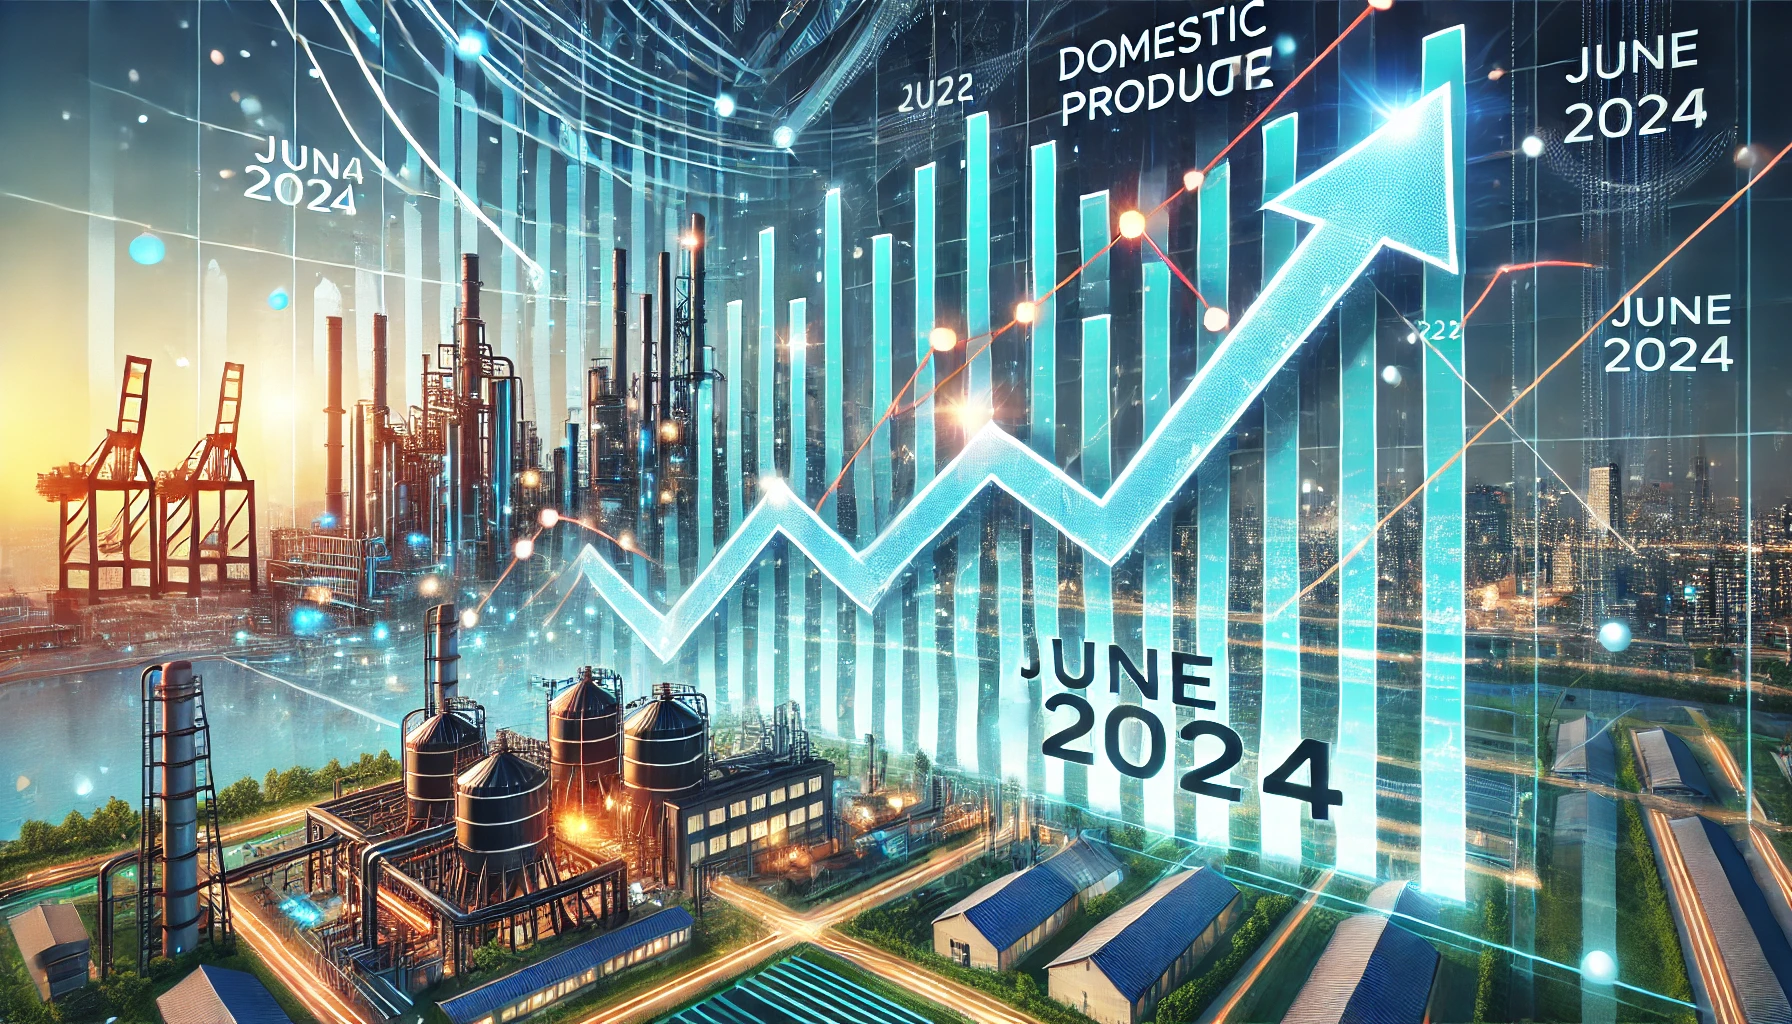 domestic producer prices in June 2024